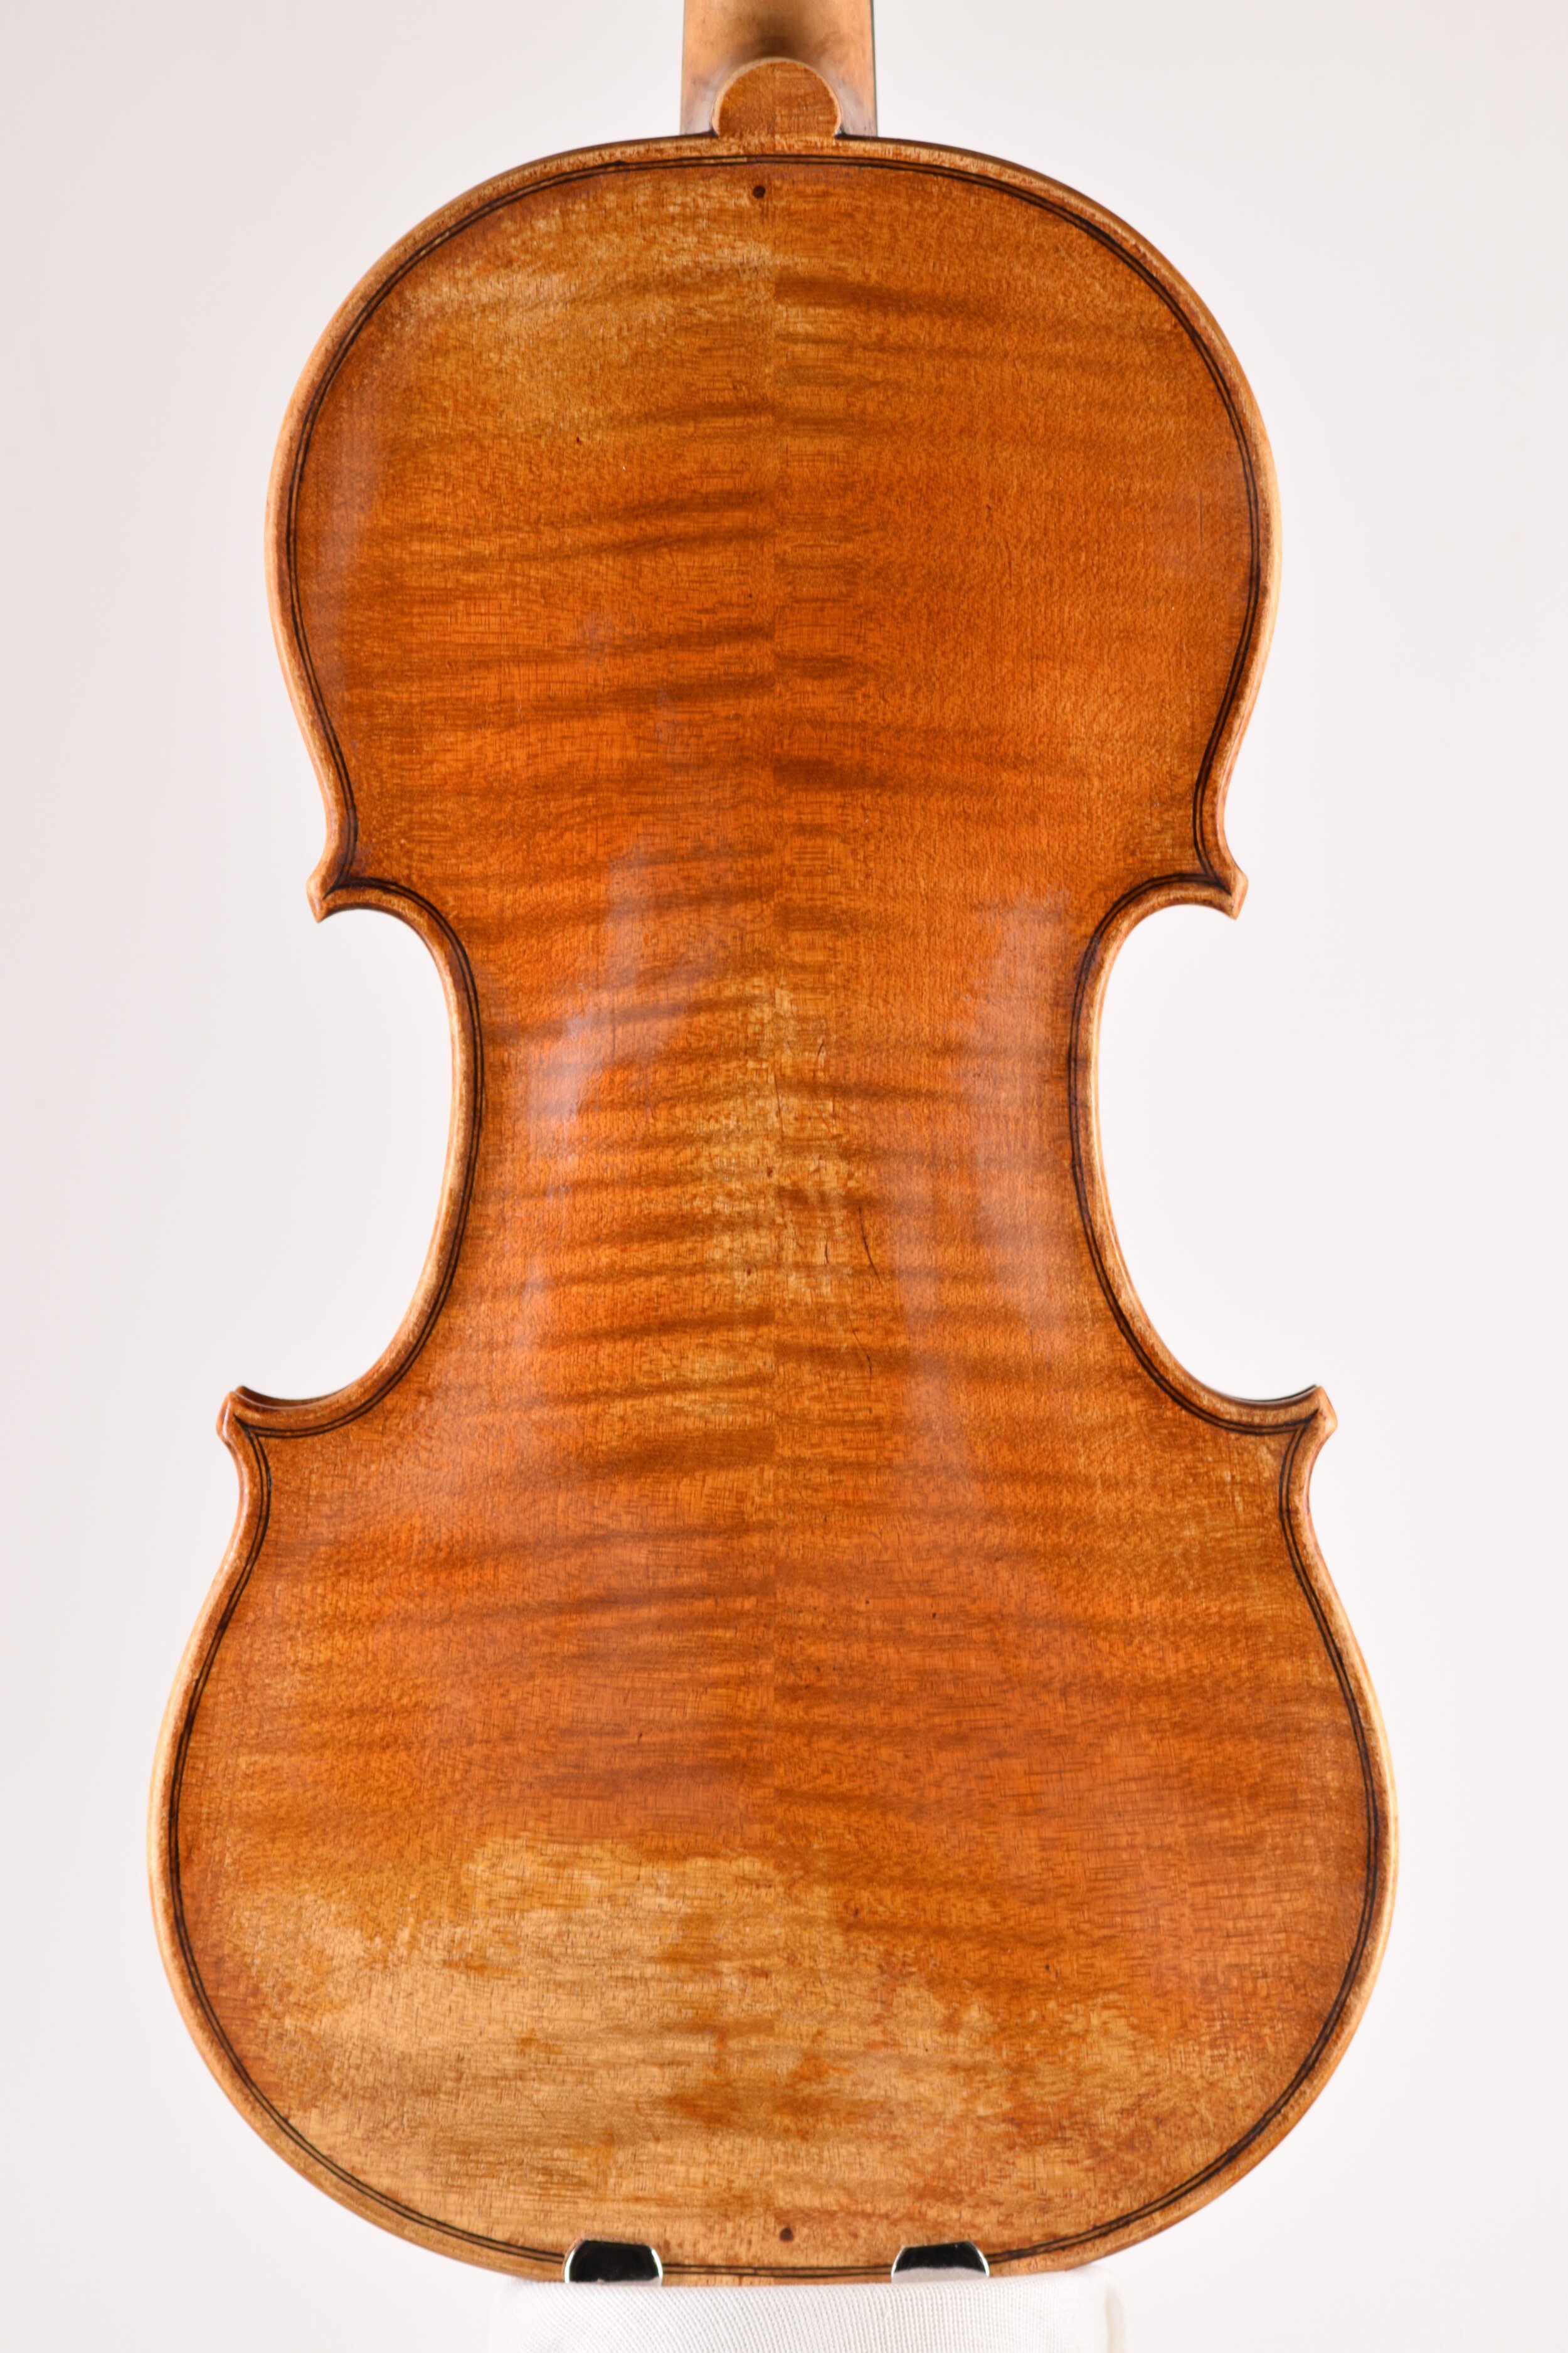 An image of the back of a vioin